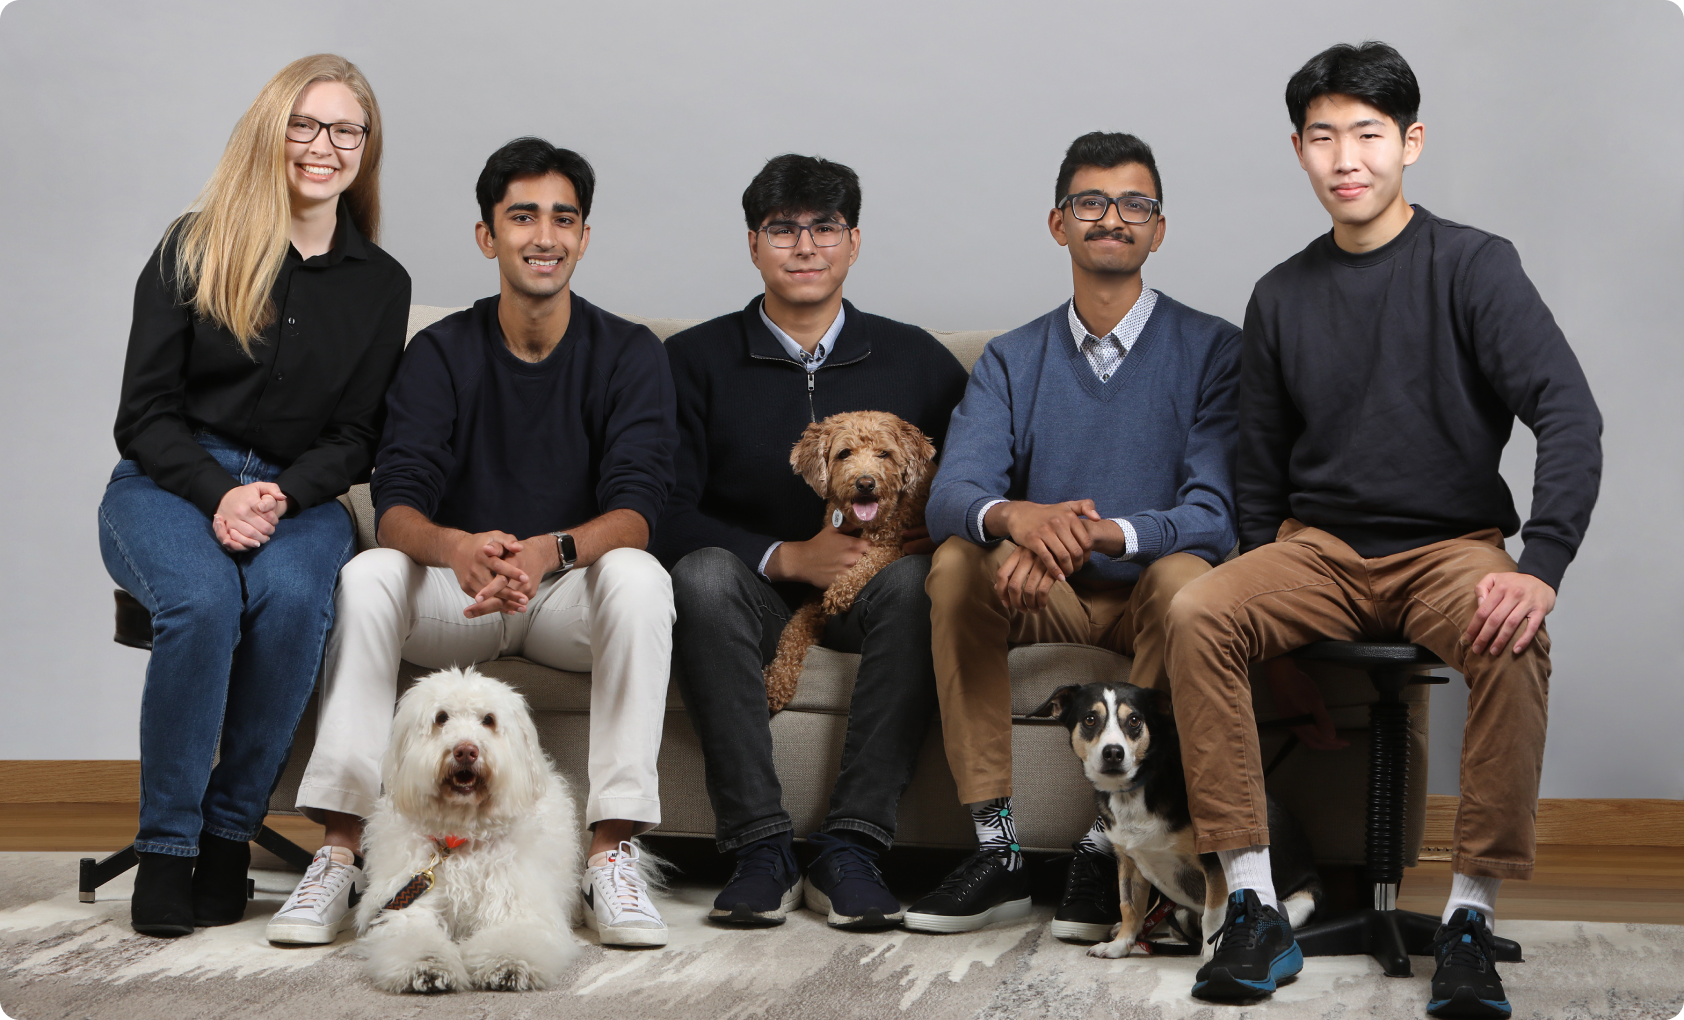 The Otto team members (including dogs!)